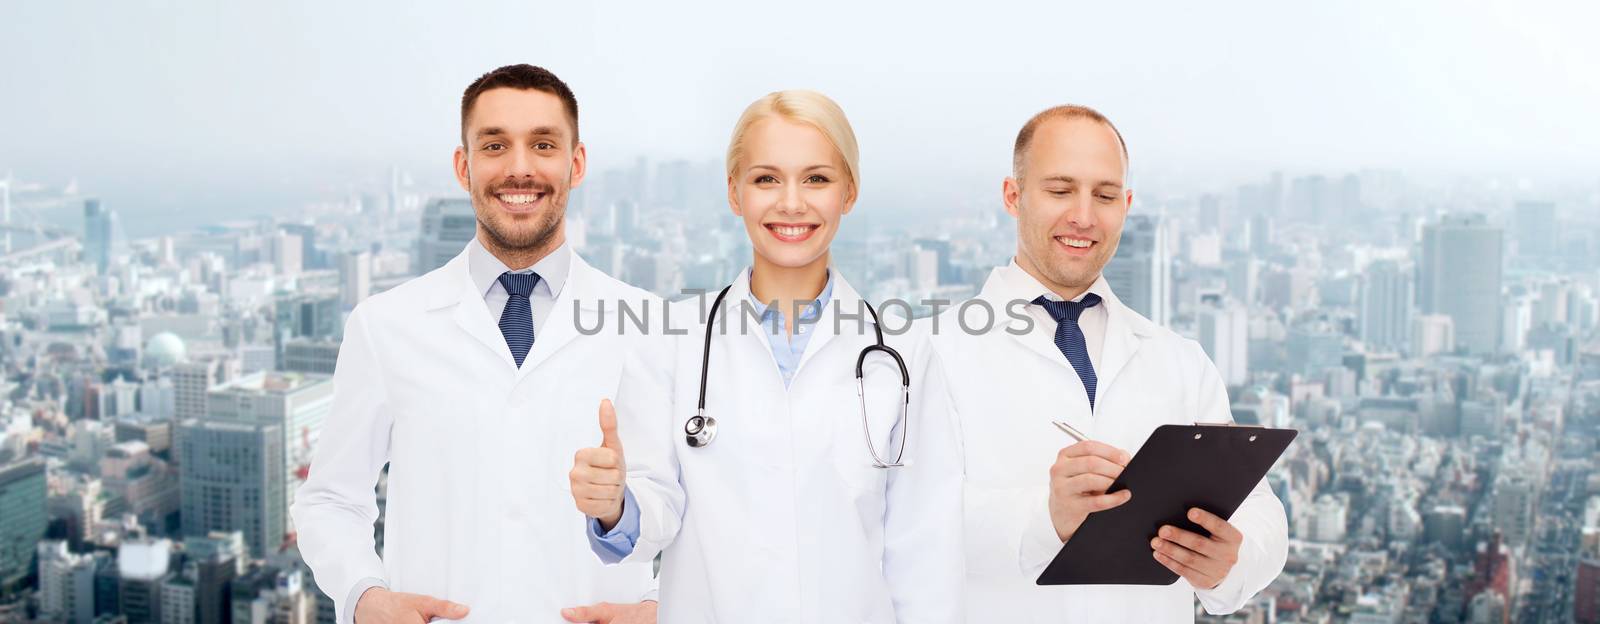 group of doctors showing thumbs up over white by dolgachov